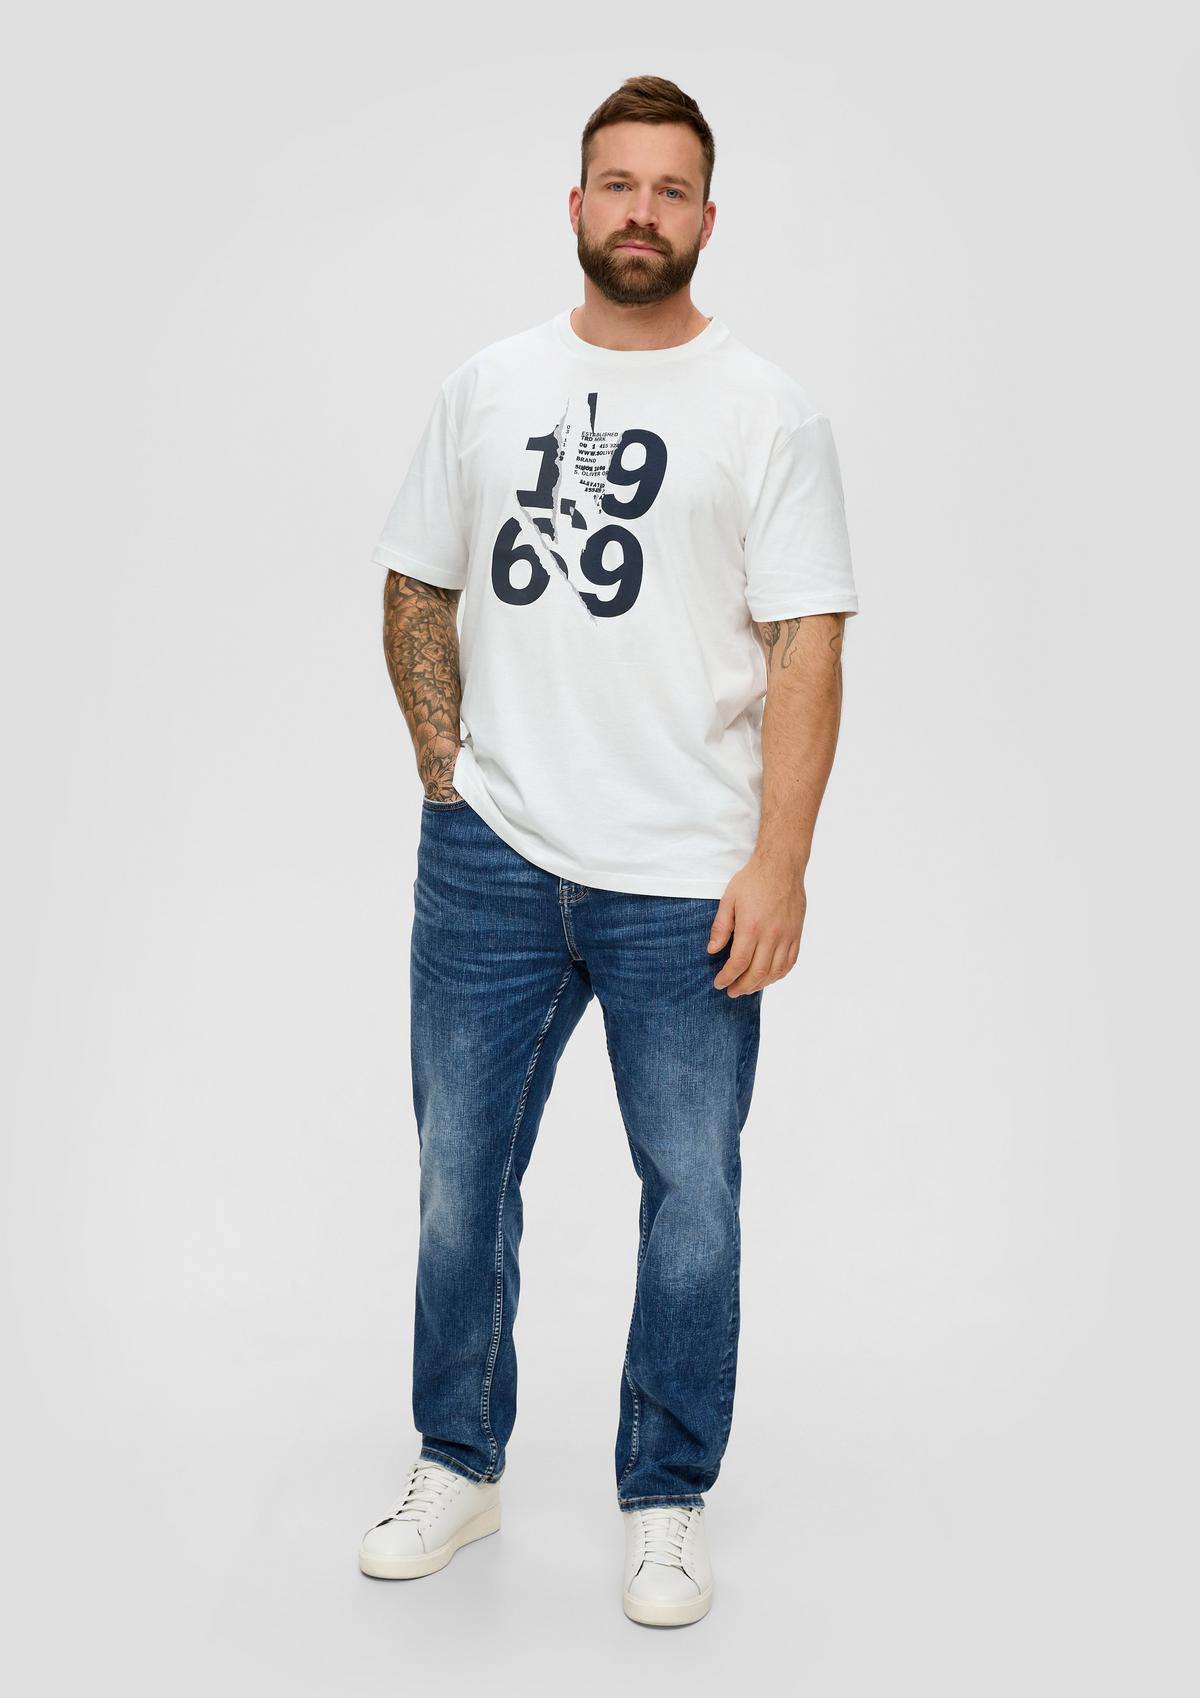 with white - T-shirt front a print